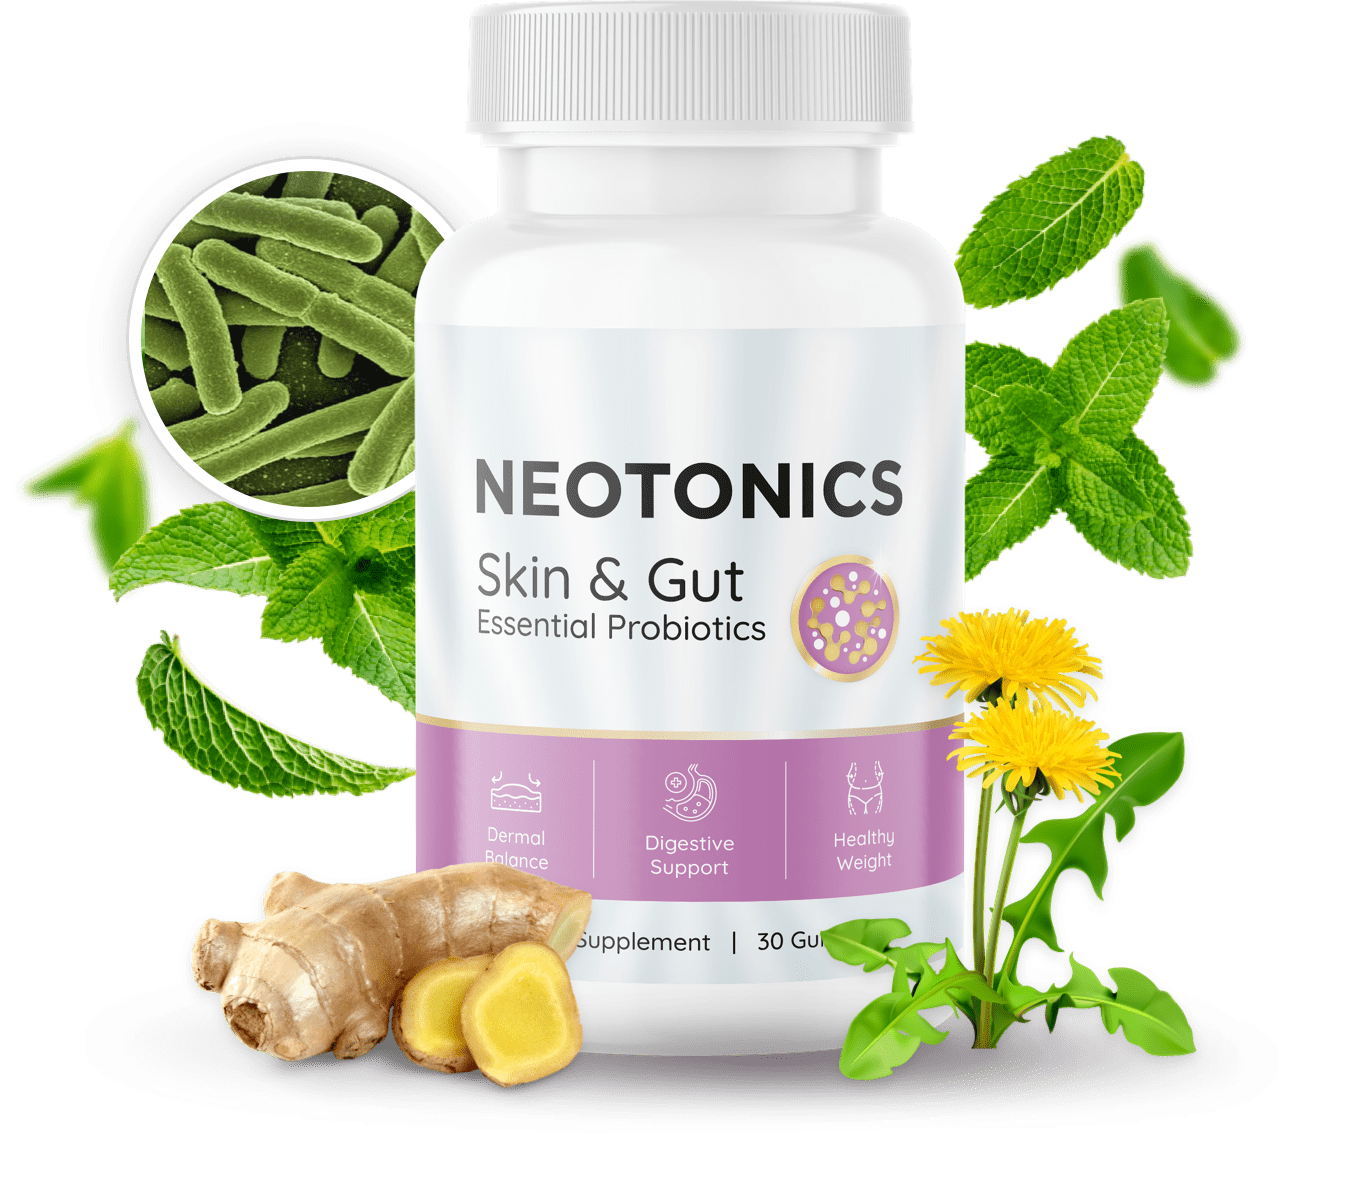 Neotonics Skin and Gut Supplement: Unlocking Radiant Health from the Inside Out